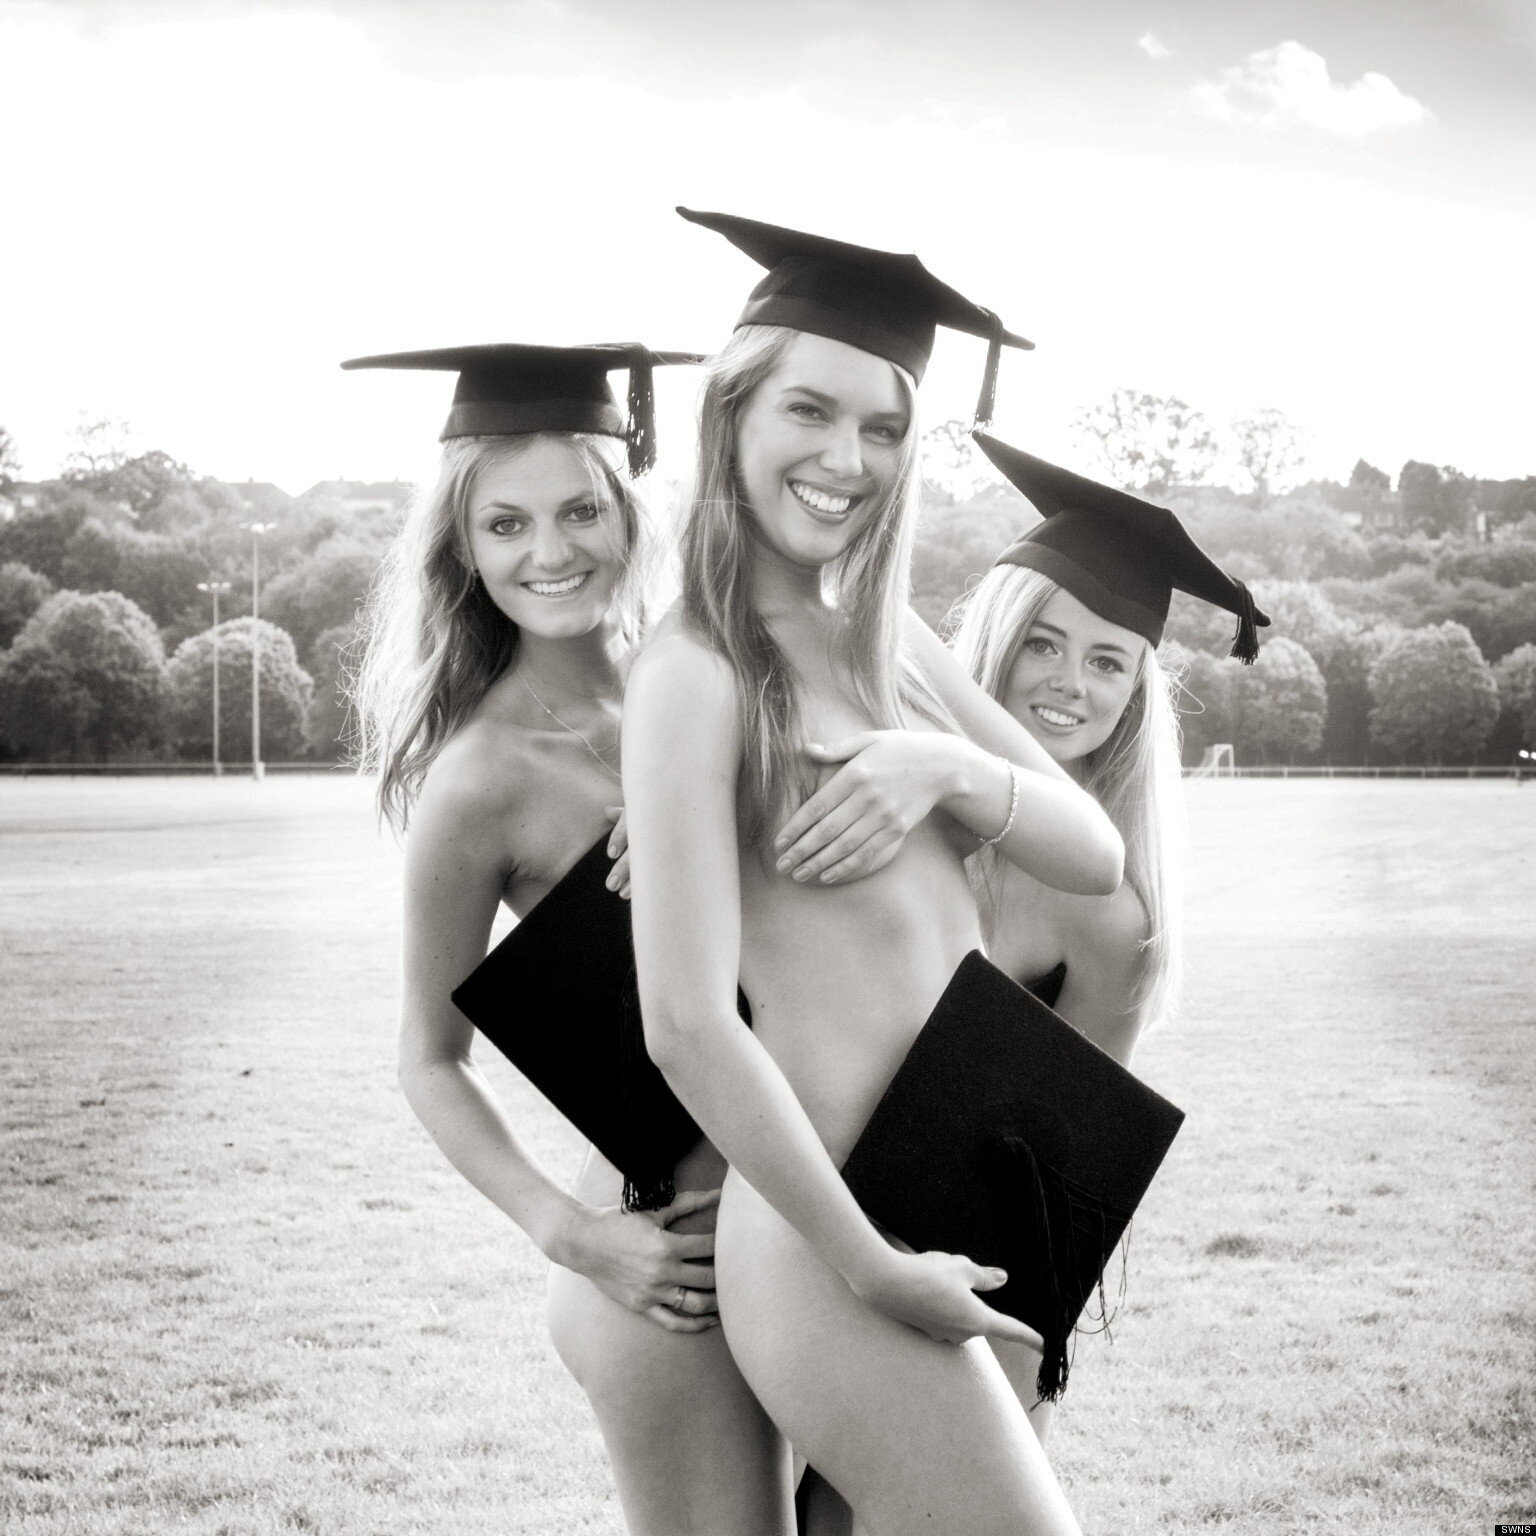 Cardiff University Student Amy Morfoot Strips For Naked Charity Calendar (PICTURES) HuffPost UK Students